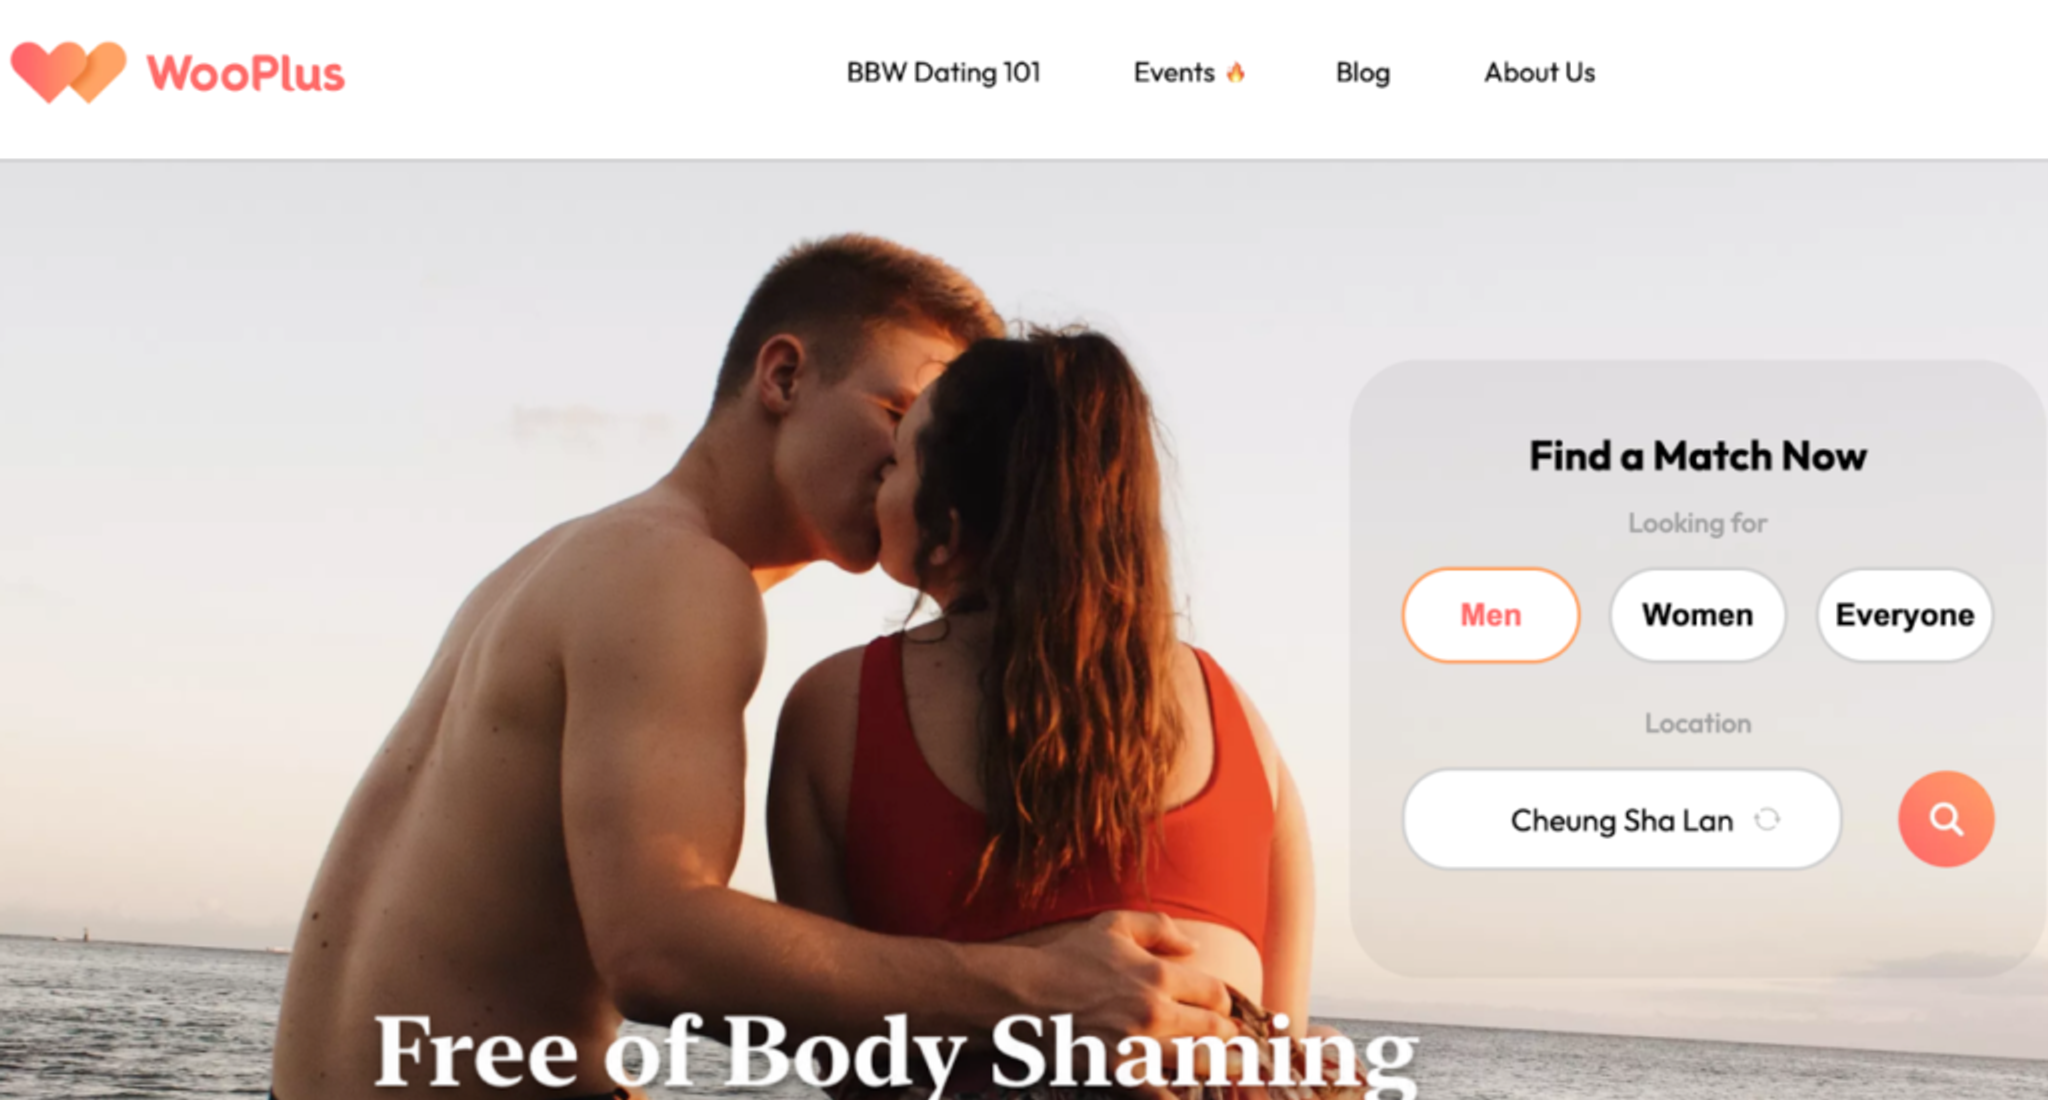 WooPlus, greatest site for senior dating